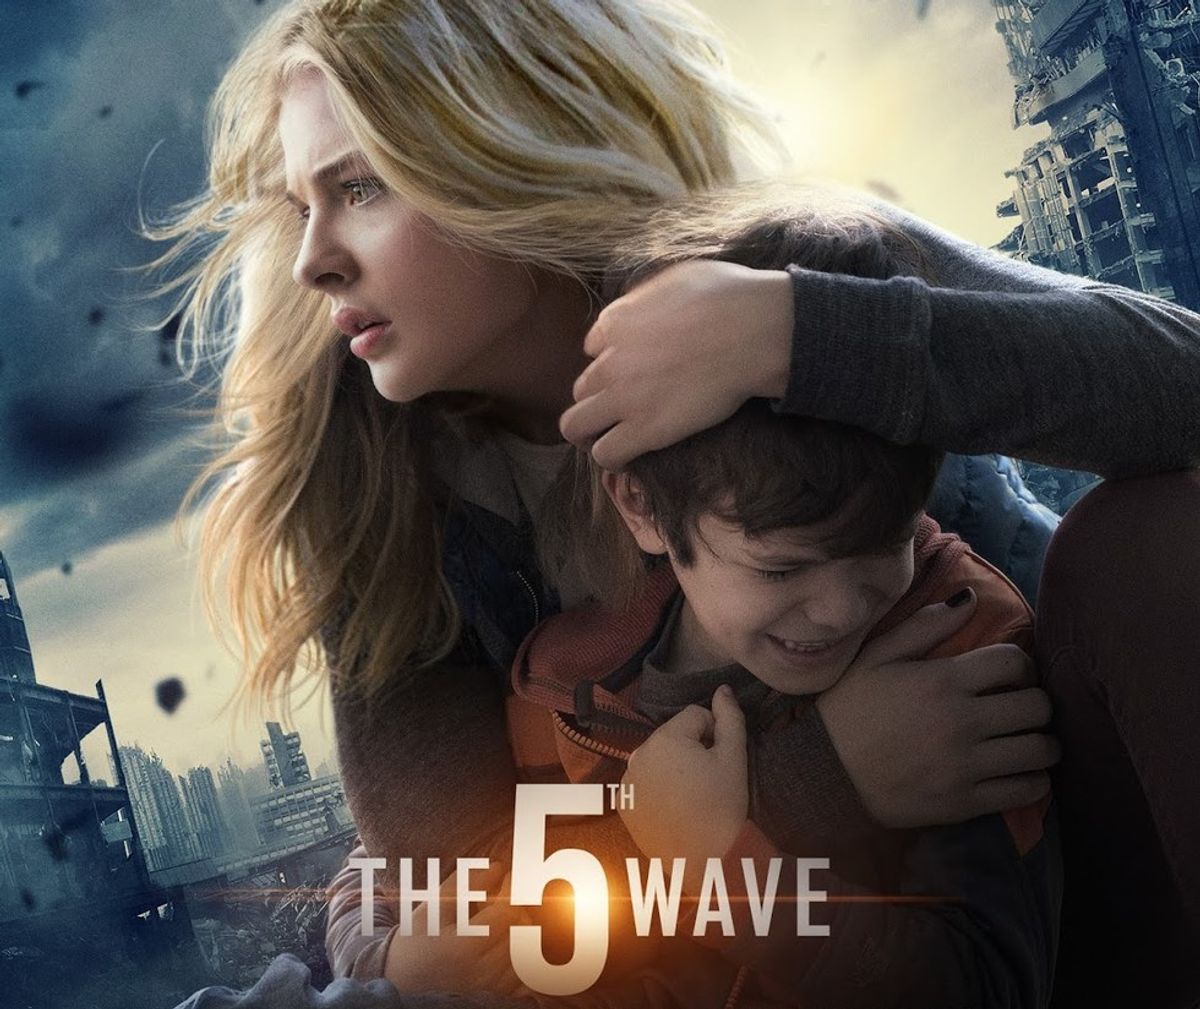 "The 5th Wave:" A Review